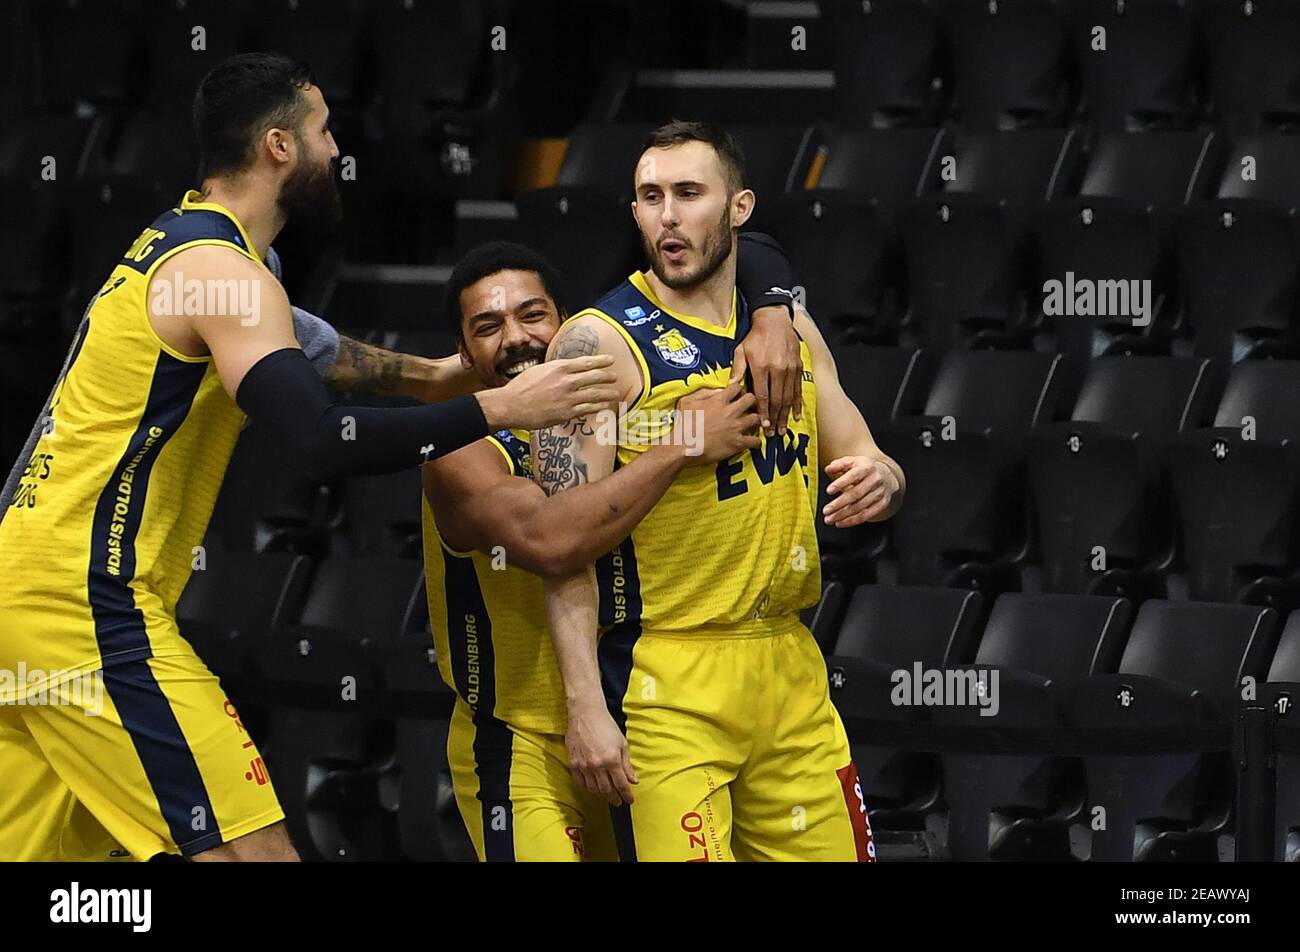 Oldenburg, Germany. 10th Feb, 2021. Basketball: Bundesliga, EWE Baskets  Oldenburg - Hamburg Towers, Main Round, Matchday 17. Oldenburg's Keith  Hornsby (r) saves the victory with a three-point shot in the last second.